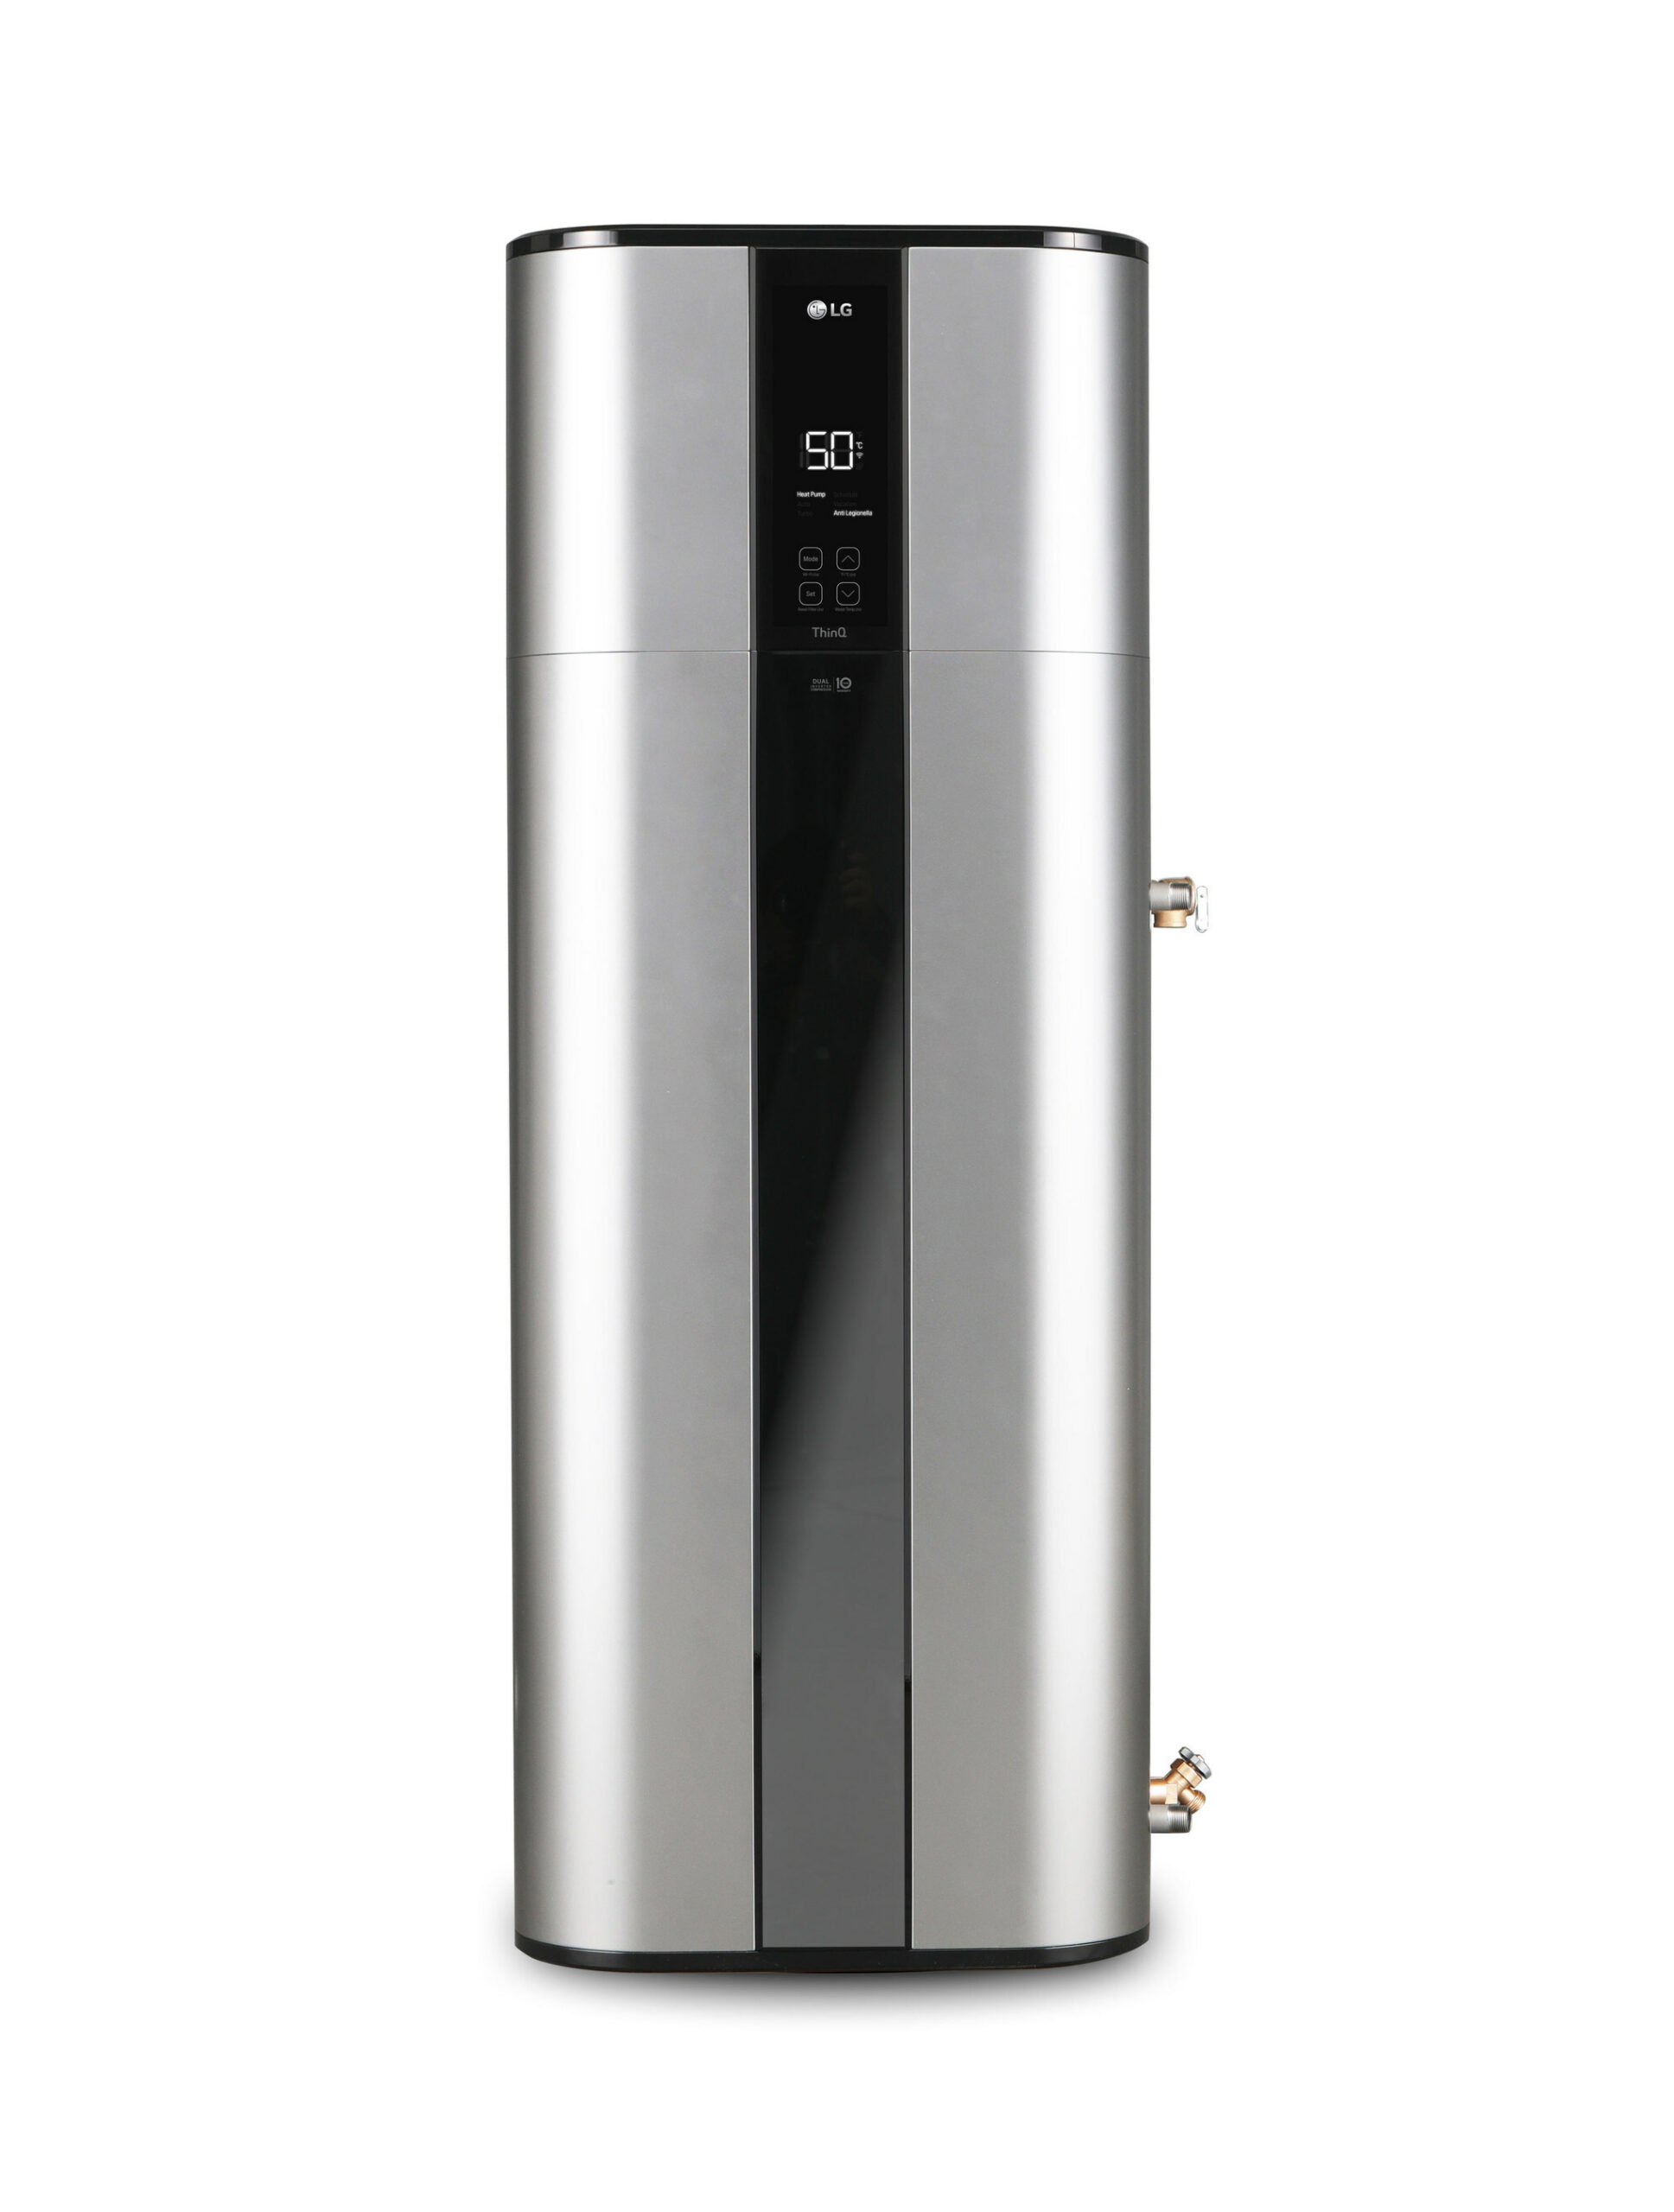 LG Debuts State-of-the-Art Inverter Heat Pump Water Heater